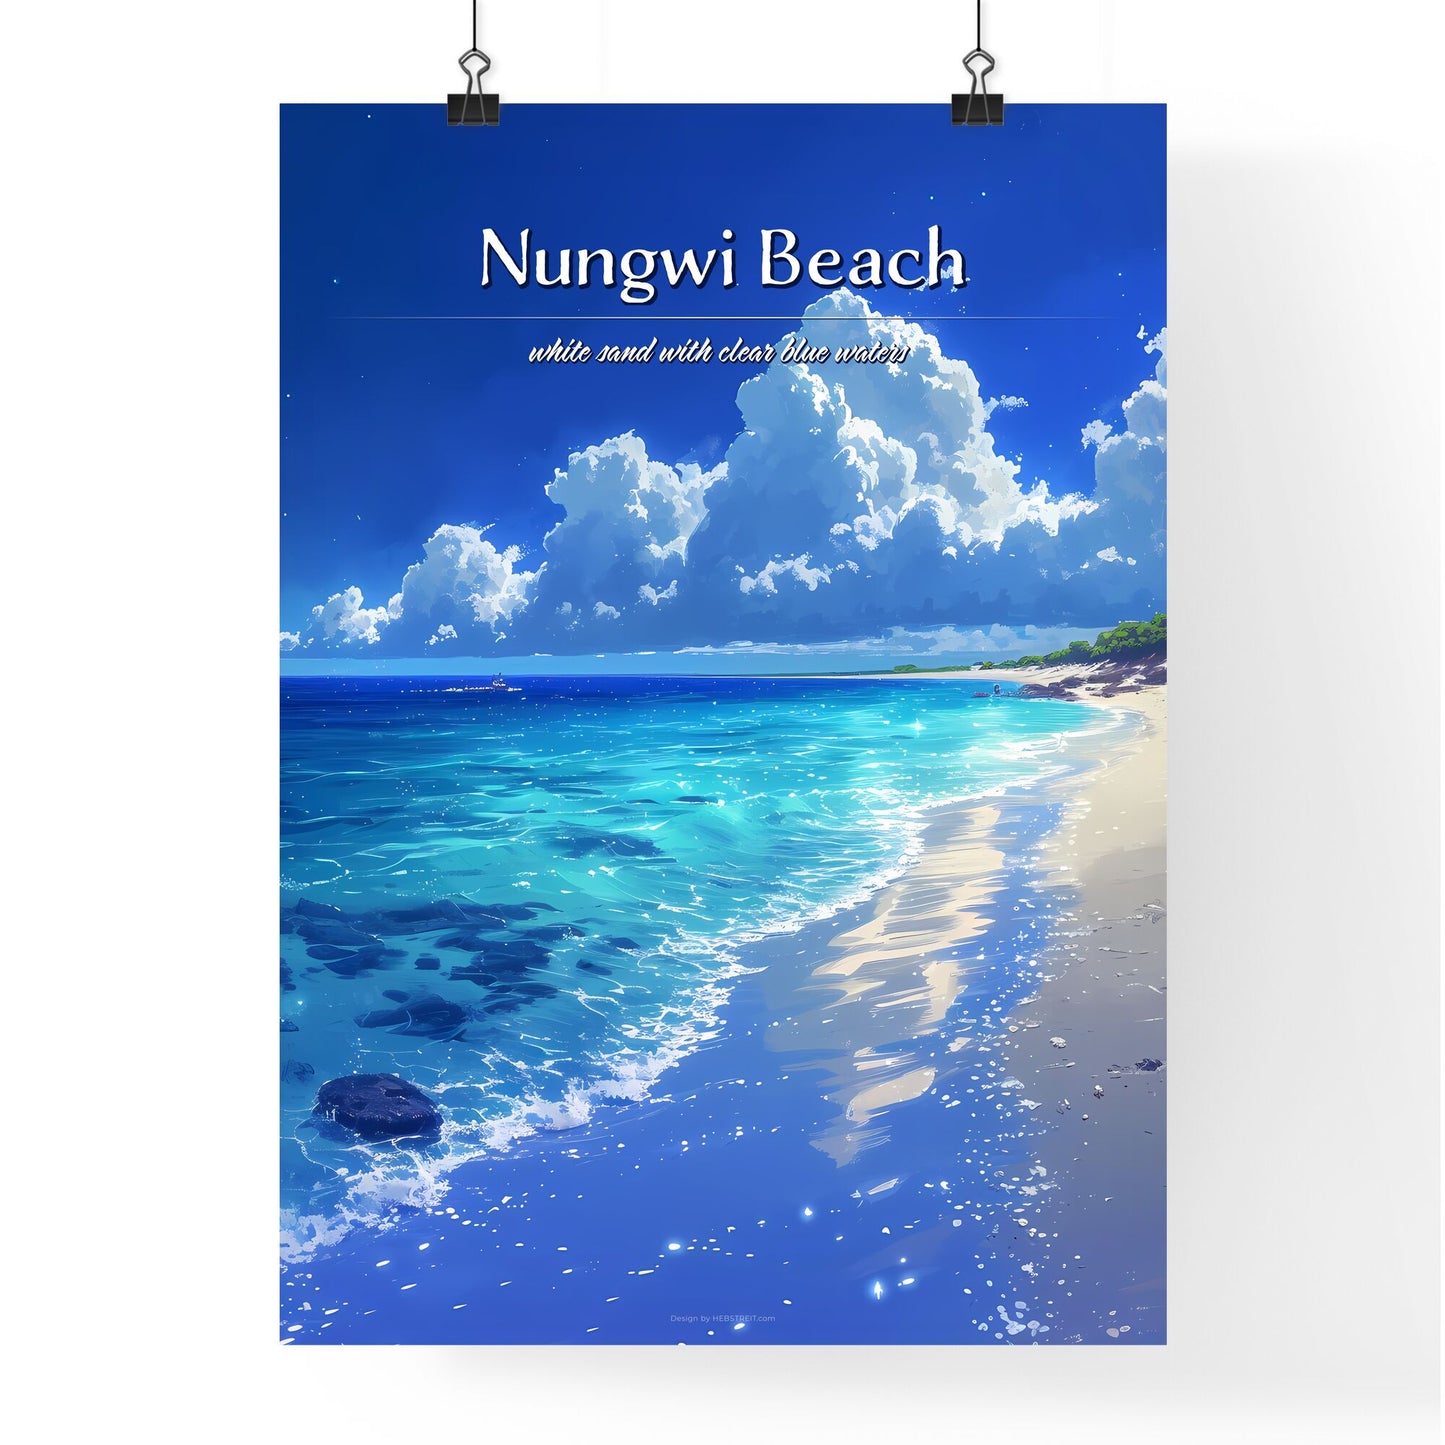 Nungwi Beach - Art print of a beach with blue water and clouds Default Title